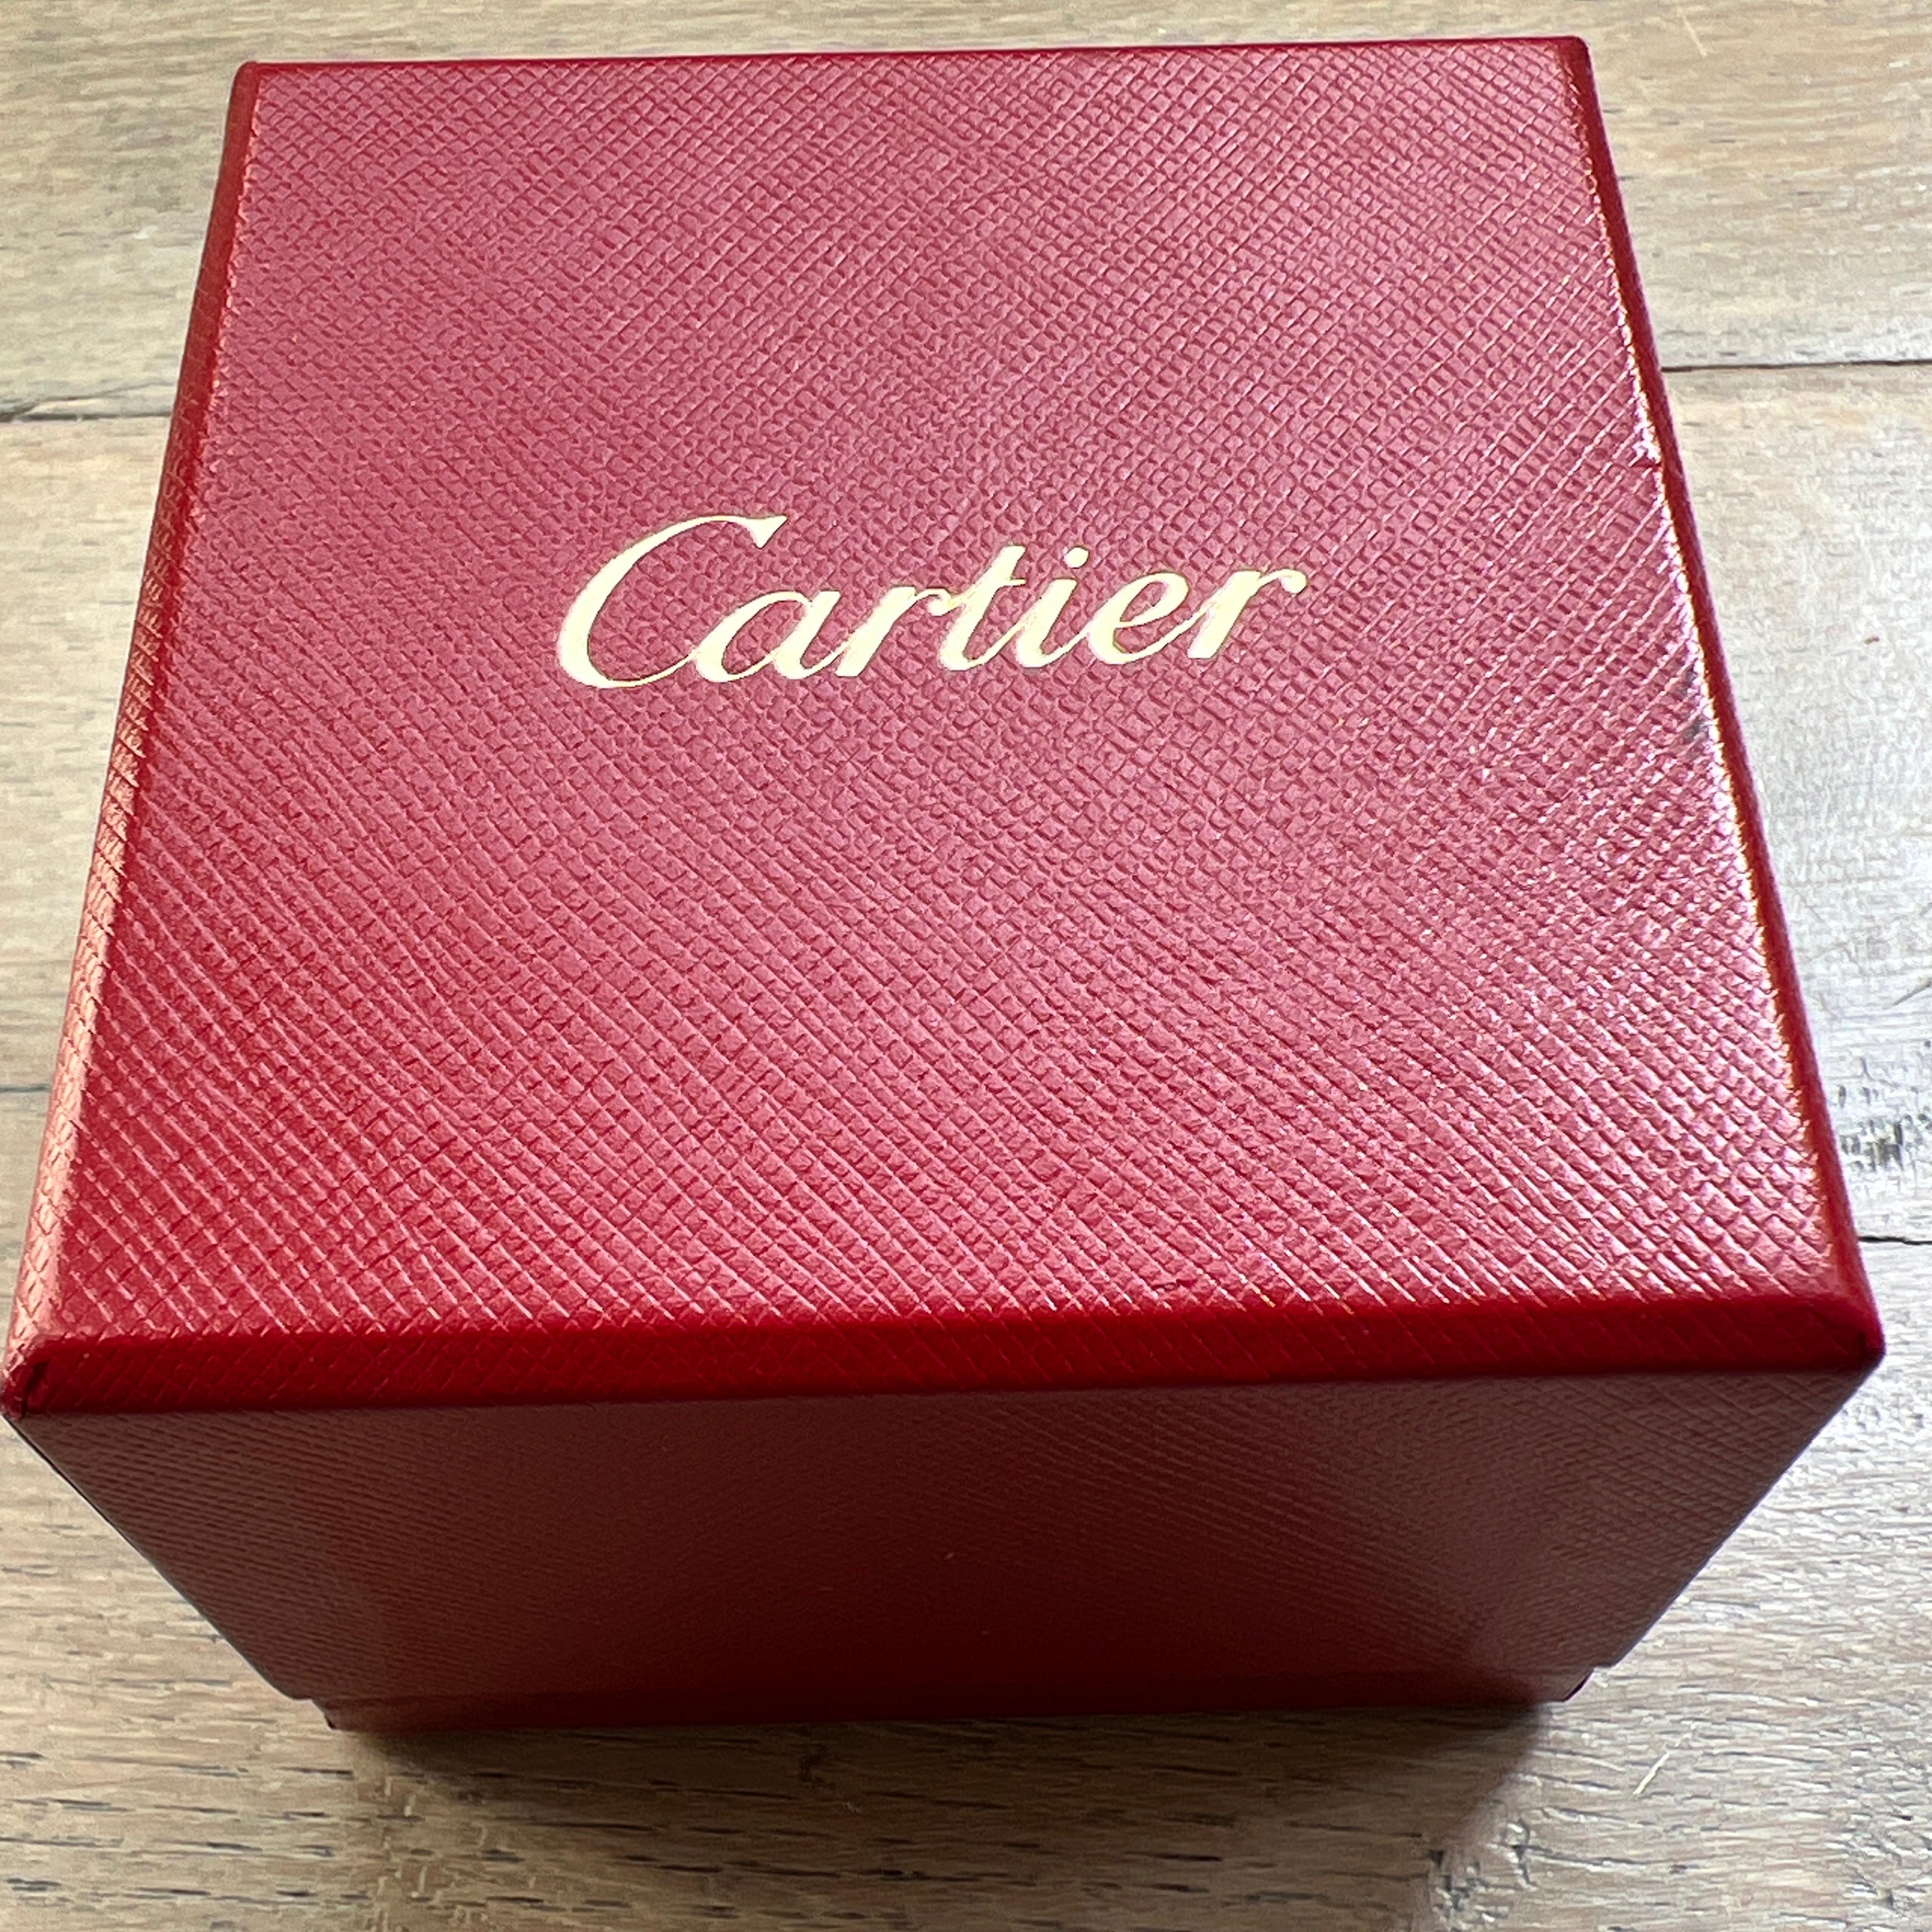 Cartier Original 1992 Oval Ruby 18 Karat Yellow Gold Ellipse Ring For Sale 7